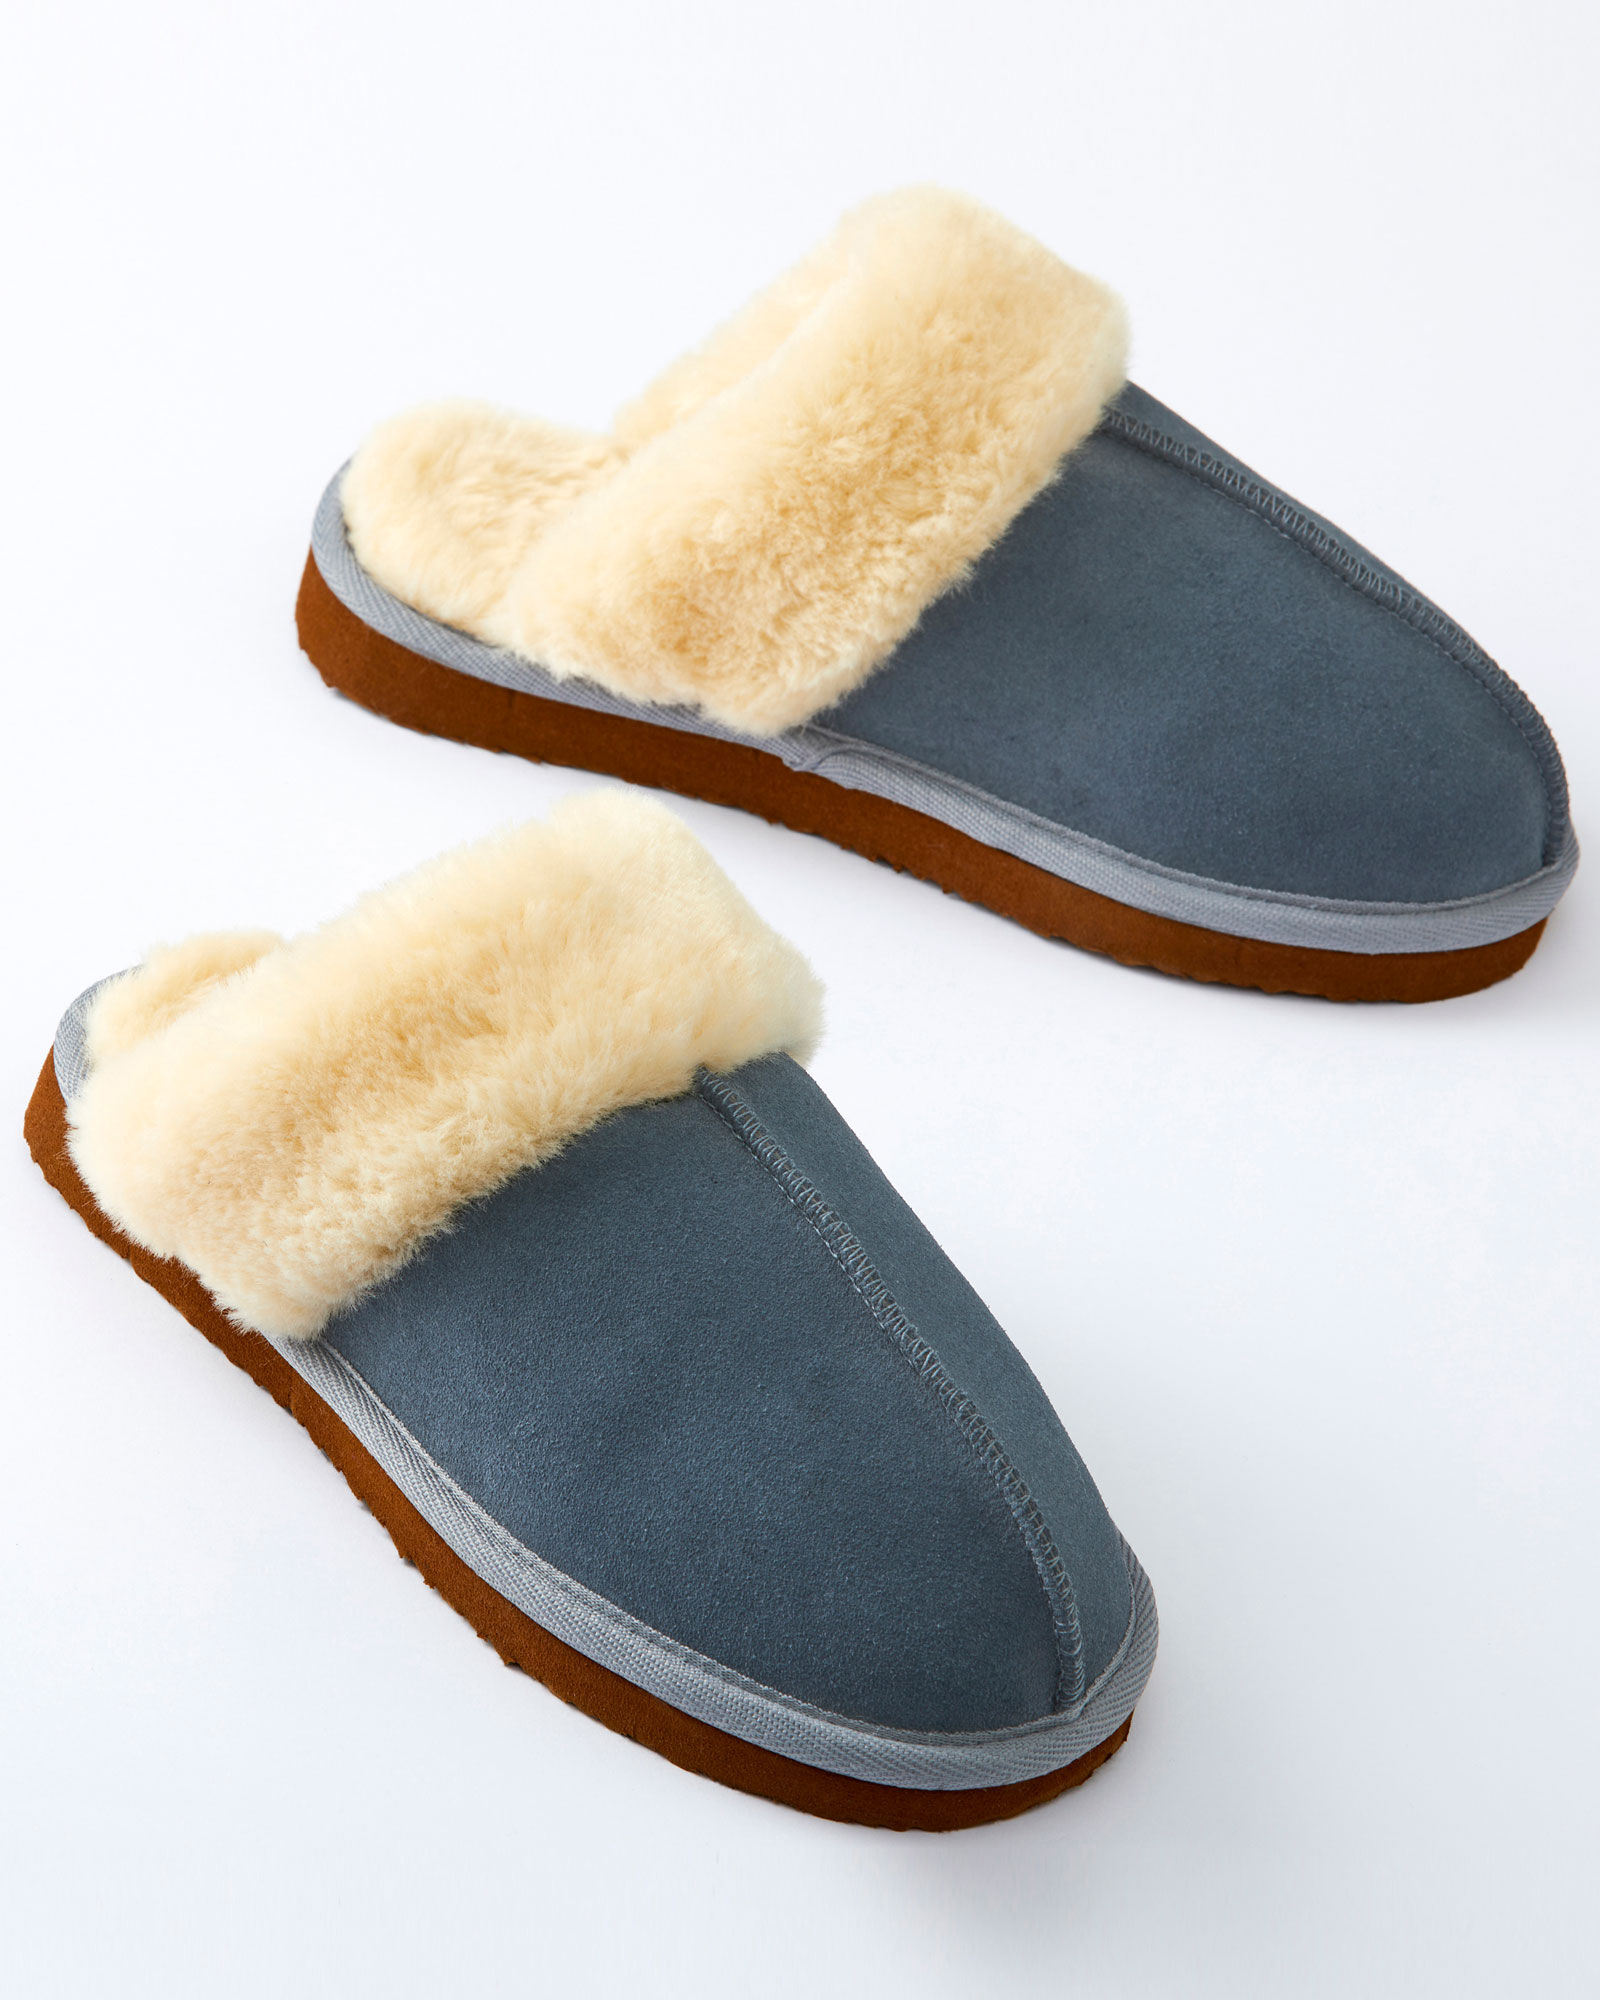 Suede Mule Slippers at Cotton Traders